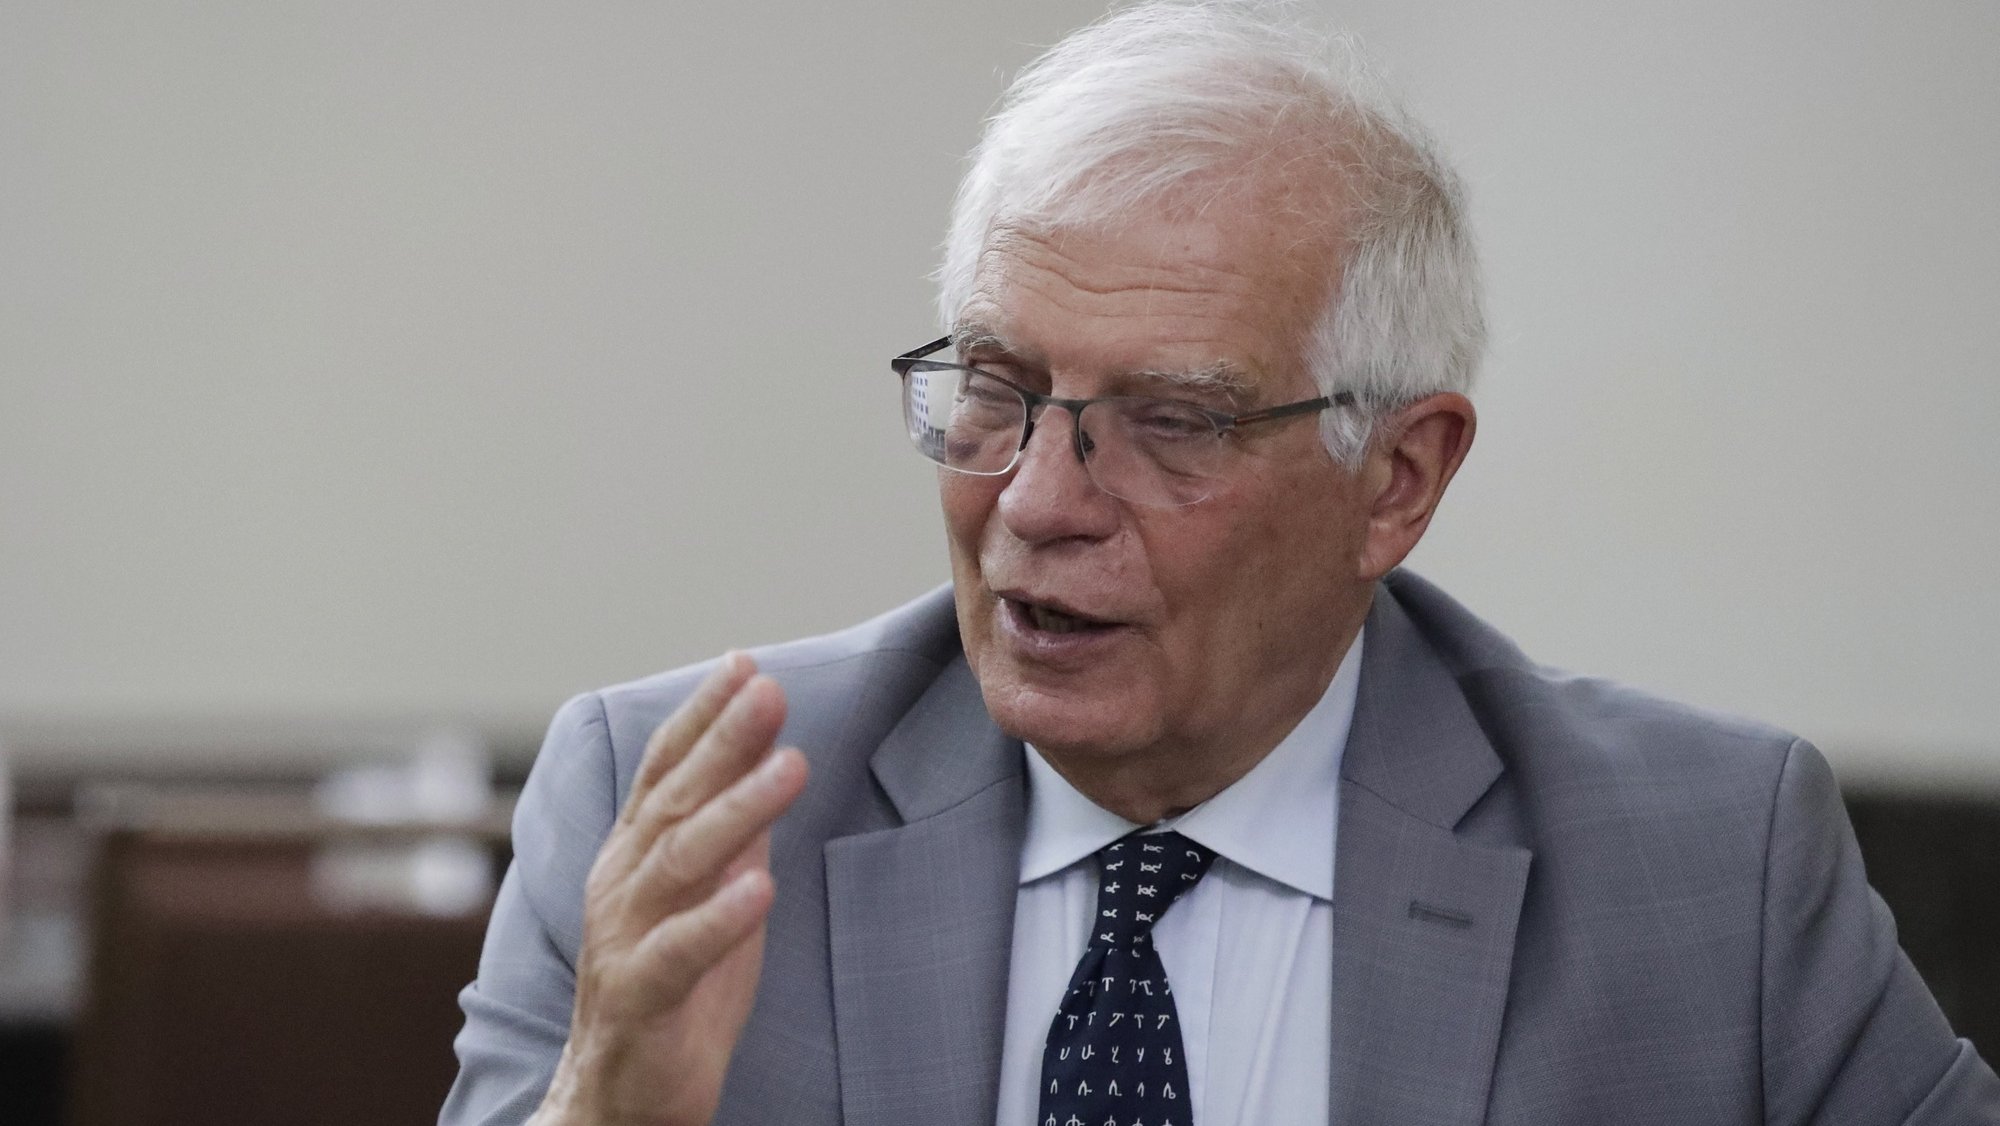 epa09925559 The High Representative of the European Union for Foreign Affairs and Security Policy, Josep Borrell, speaks with Efe during an interview in Panama City, Panama, 03 May 2022. Borrell, predicted that European countries will stop buying oil from Russia &#039;well before the end of the year.&#039; &#039;I hope so, well before the end of the year,&#039; Borrell said, after participating in a meeting of foreign ministers of the Central American Integration System (SICA) and the Caribbean Community. (SICA) with the EU.  EPA/Bienvenido Velasco